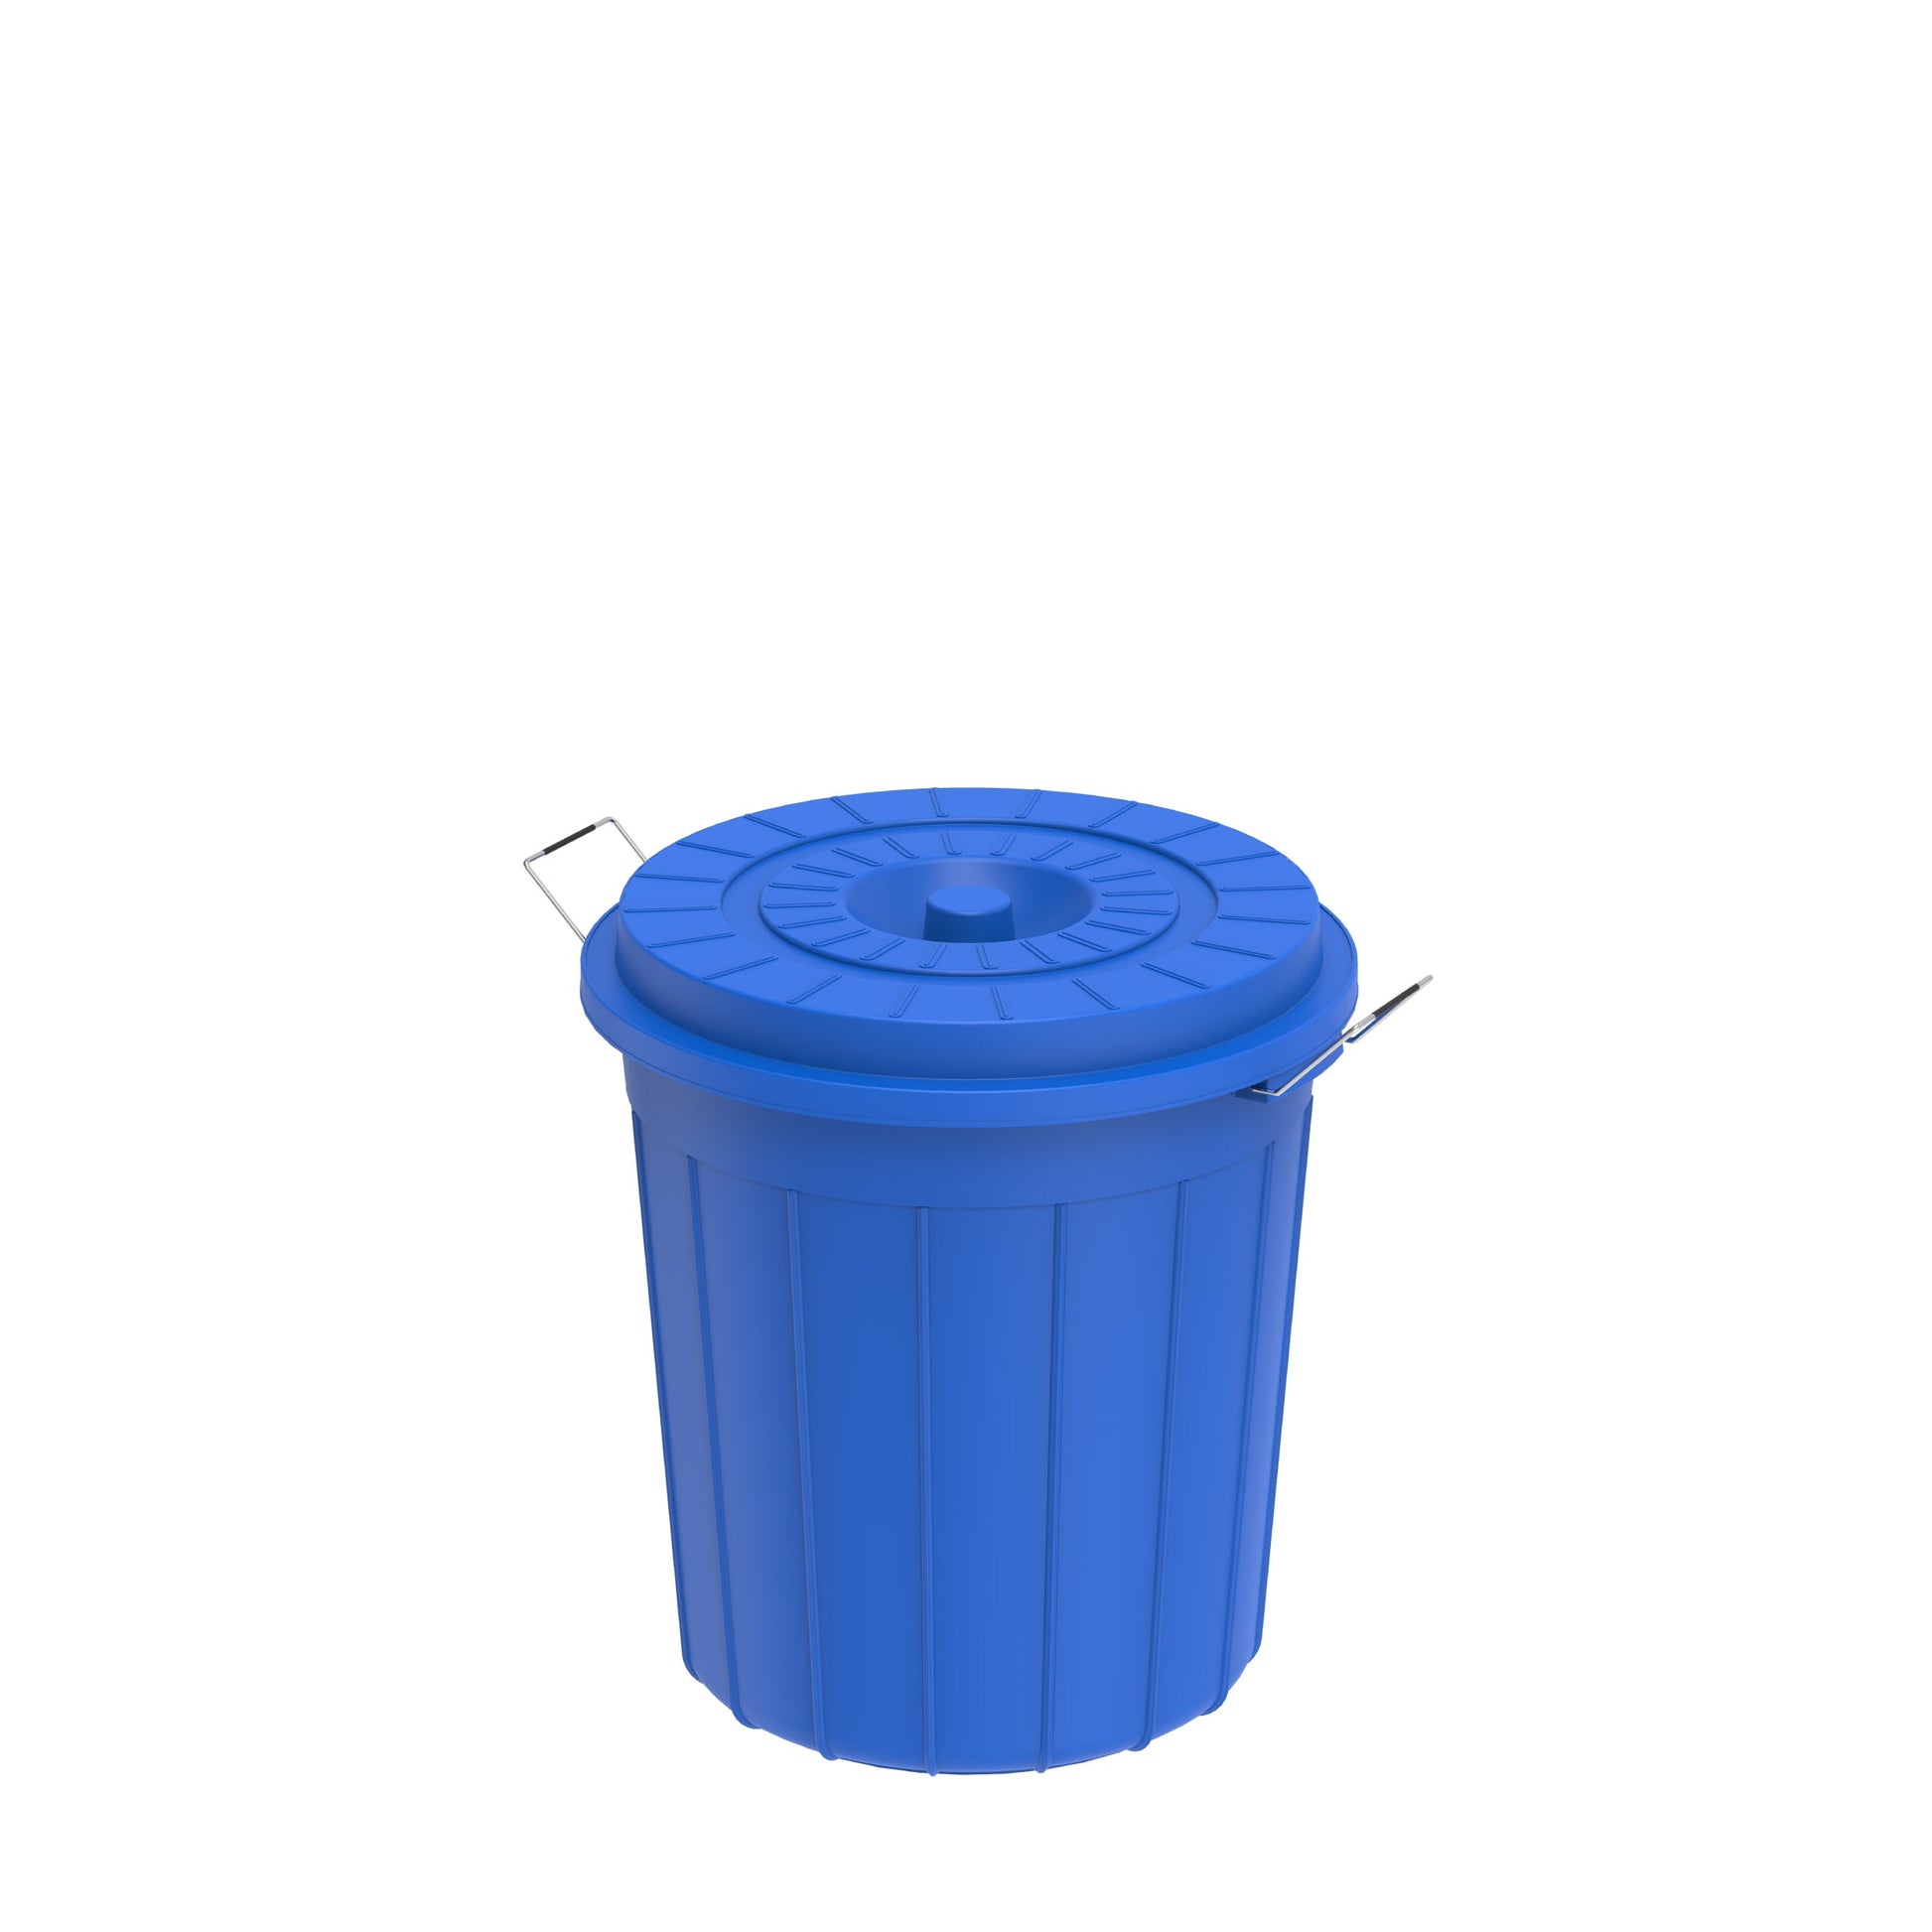 30L Round Plastic Drums with Lid - Cosmoplast Bahrain